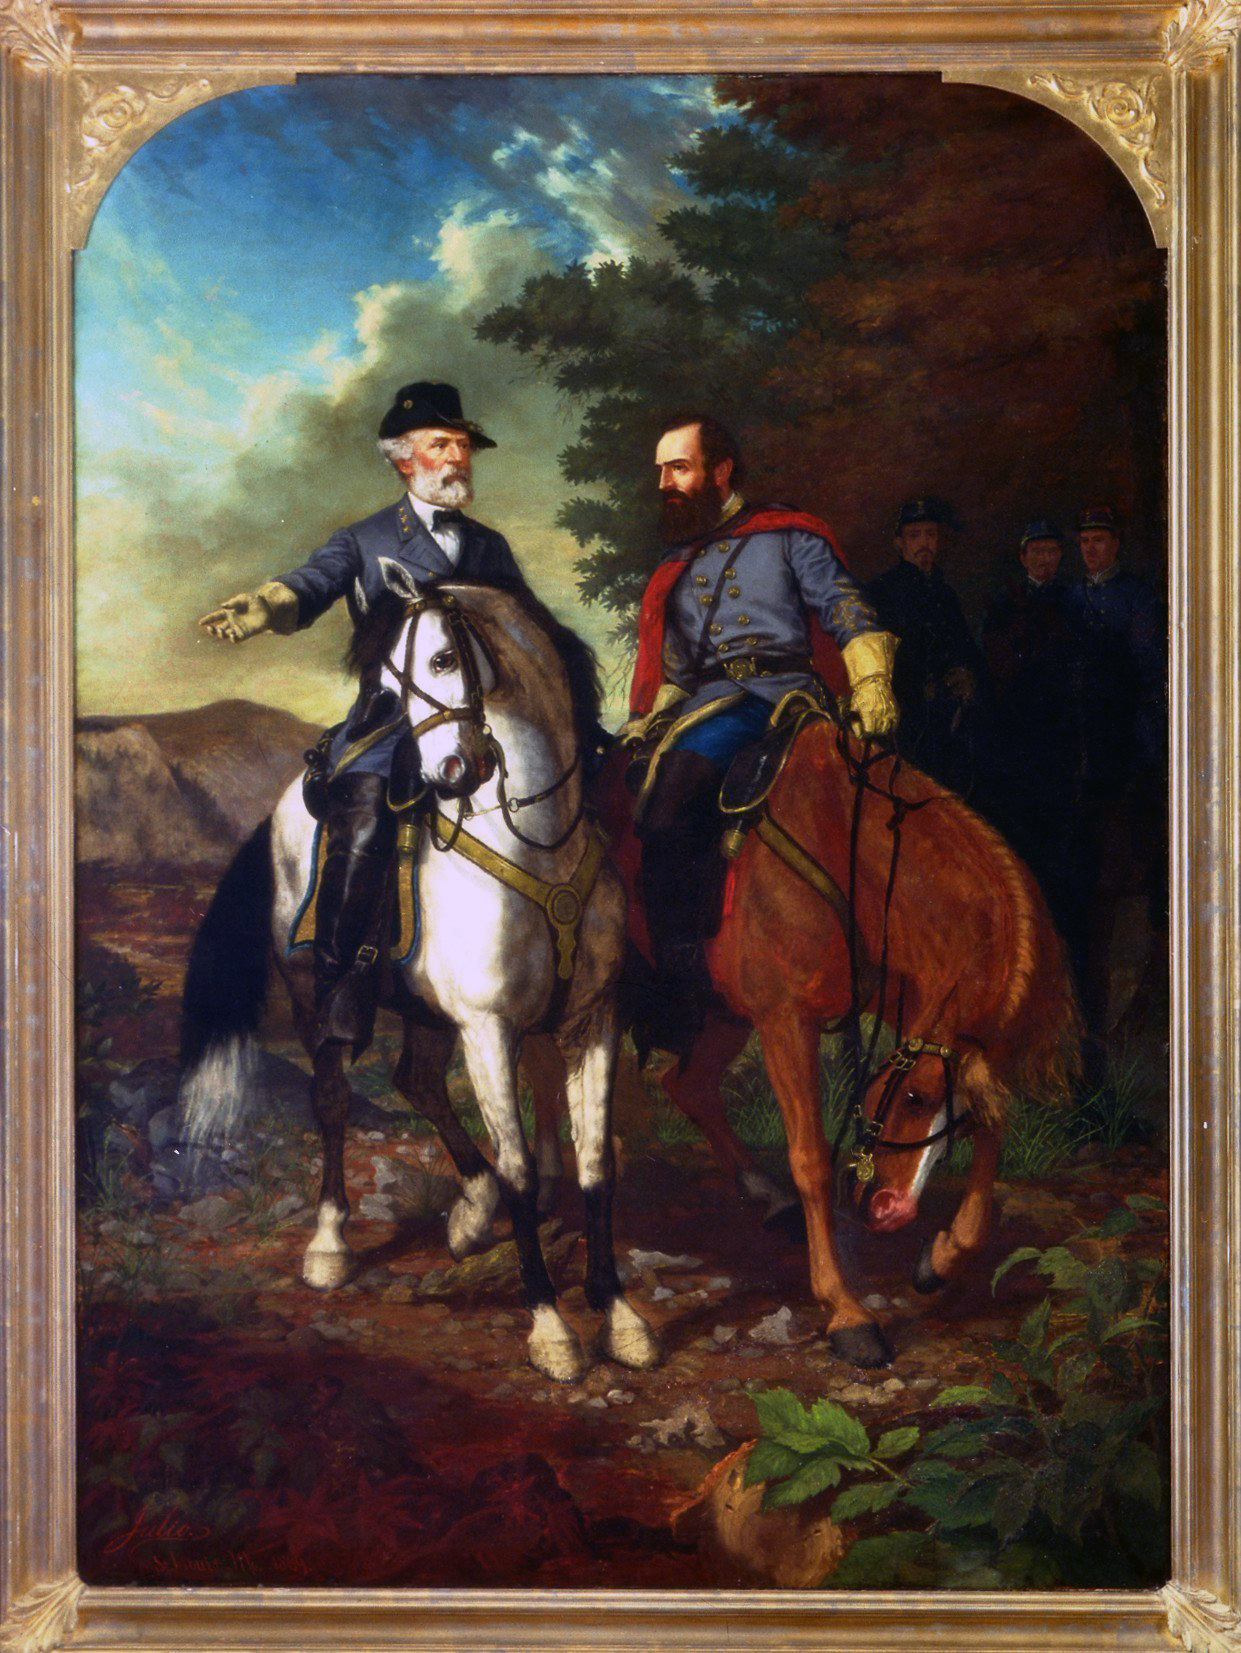 Everett B. D. Julio, <em>The Last Meeting of Lee and Jackson</em>, 1869, oil on canvas, 102 x 74 inches (<a href="https://acwm.pastperfectonline.com/webobject/D10753C4-0FDF-4975-AA36-302335262079" target="_blank" rel="noopener">American Civil War Museum</a>)